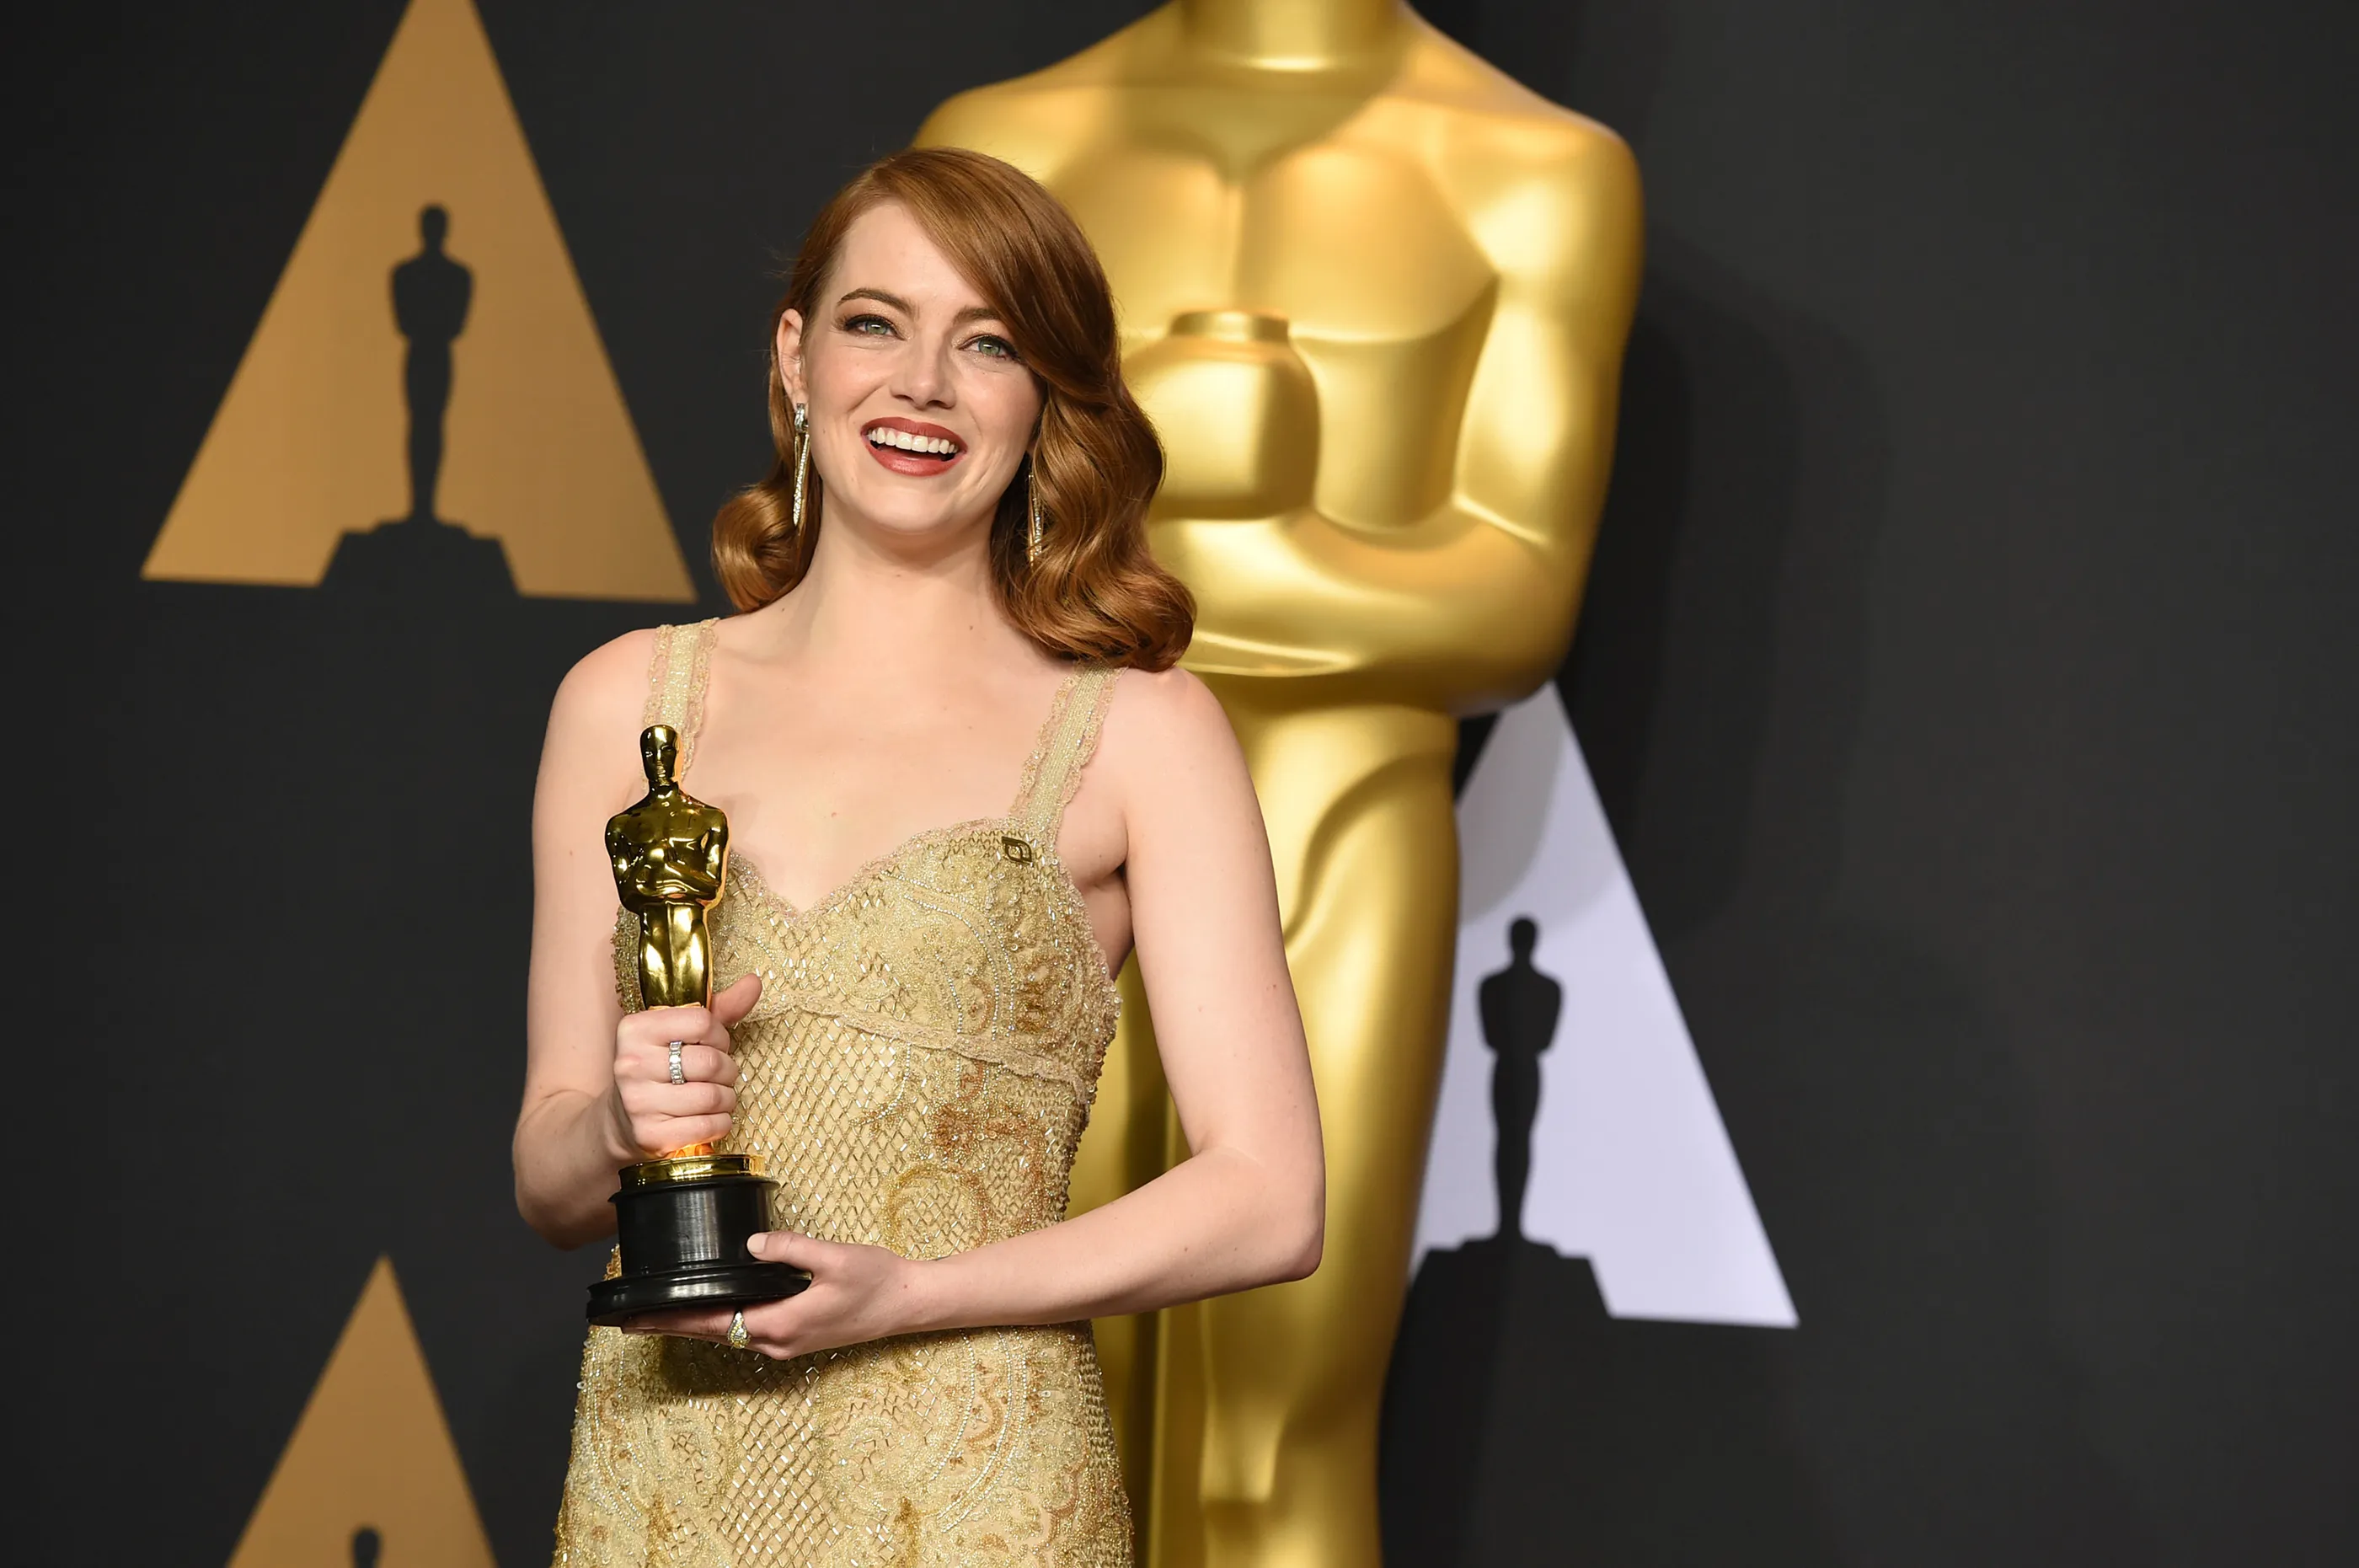 How Emma Stone Dropped Out of High School and Became the World's Highest Paid Actress at Just 28